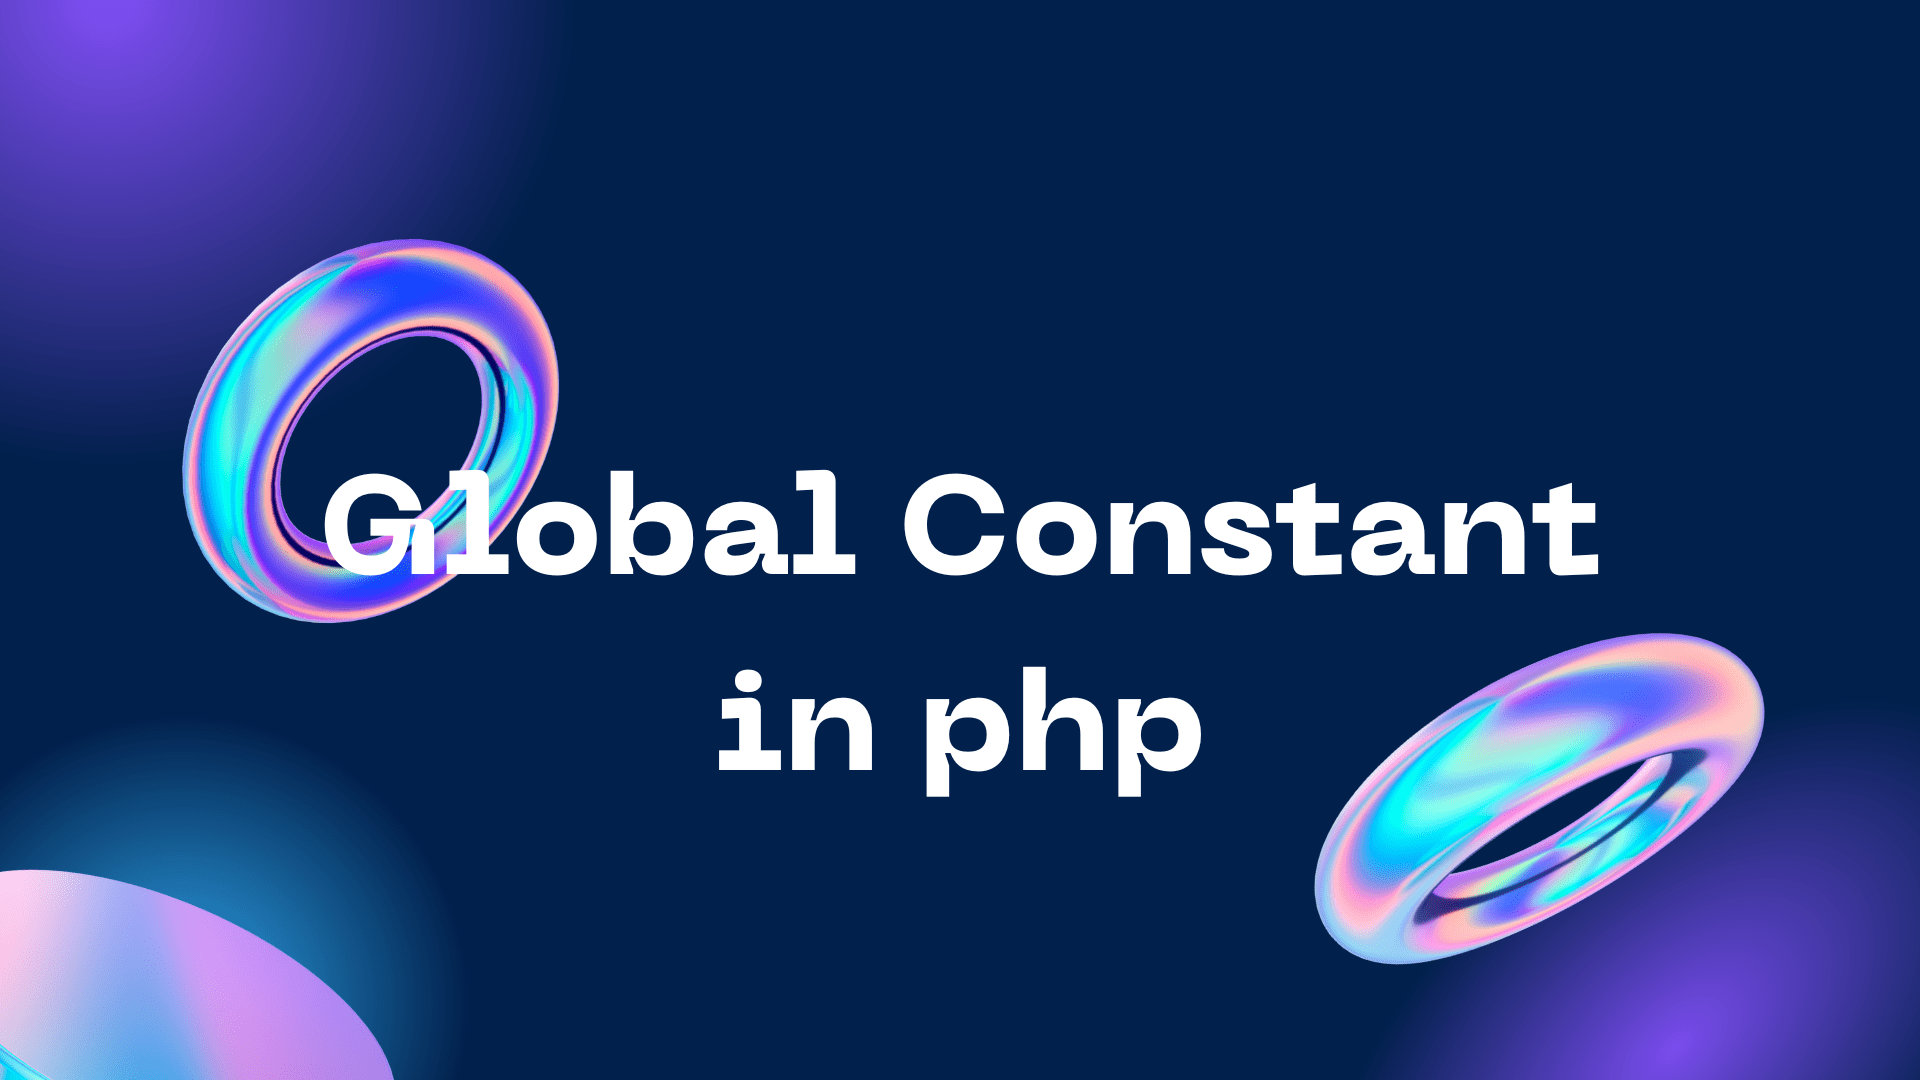 Constants are Global